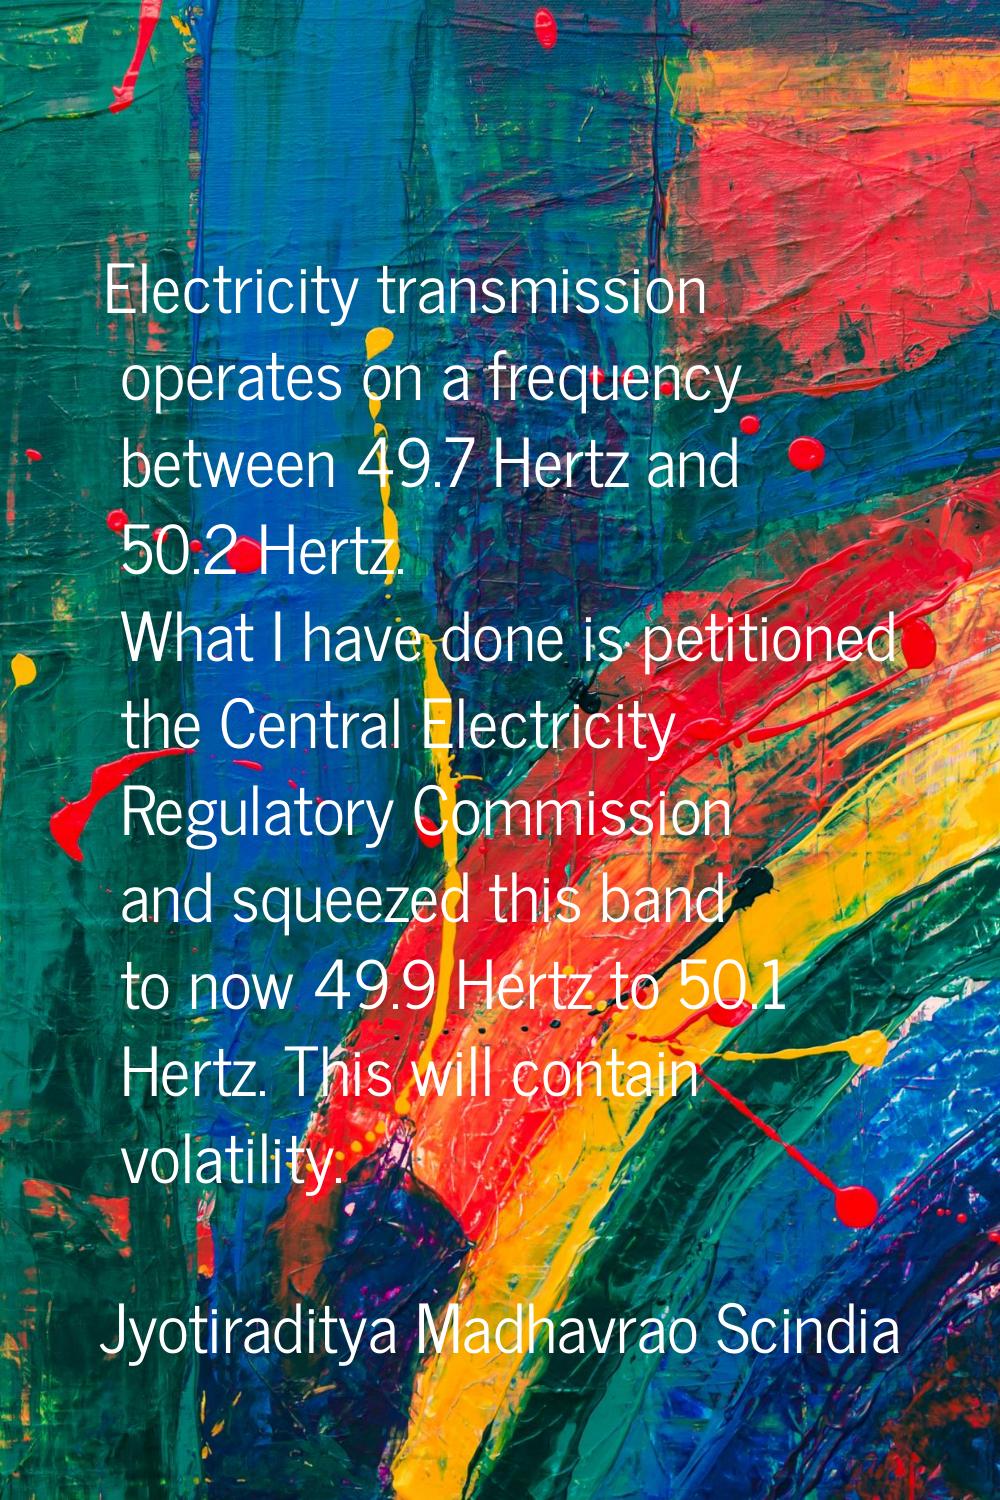 Electricity transmission operates on a frequency between 49.7 Hertz and 50.2 Hertz. What I have don